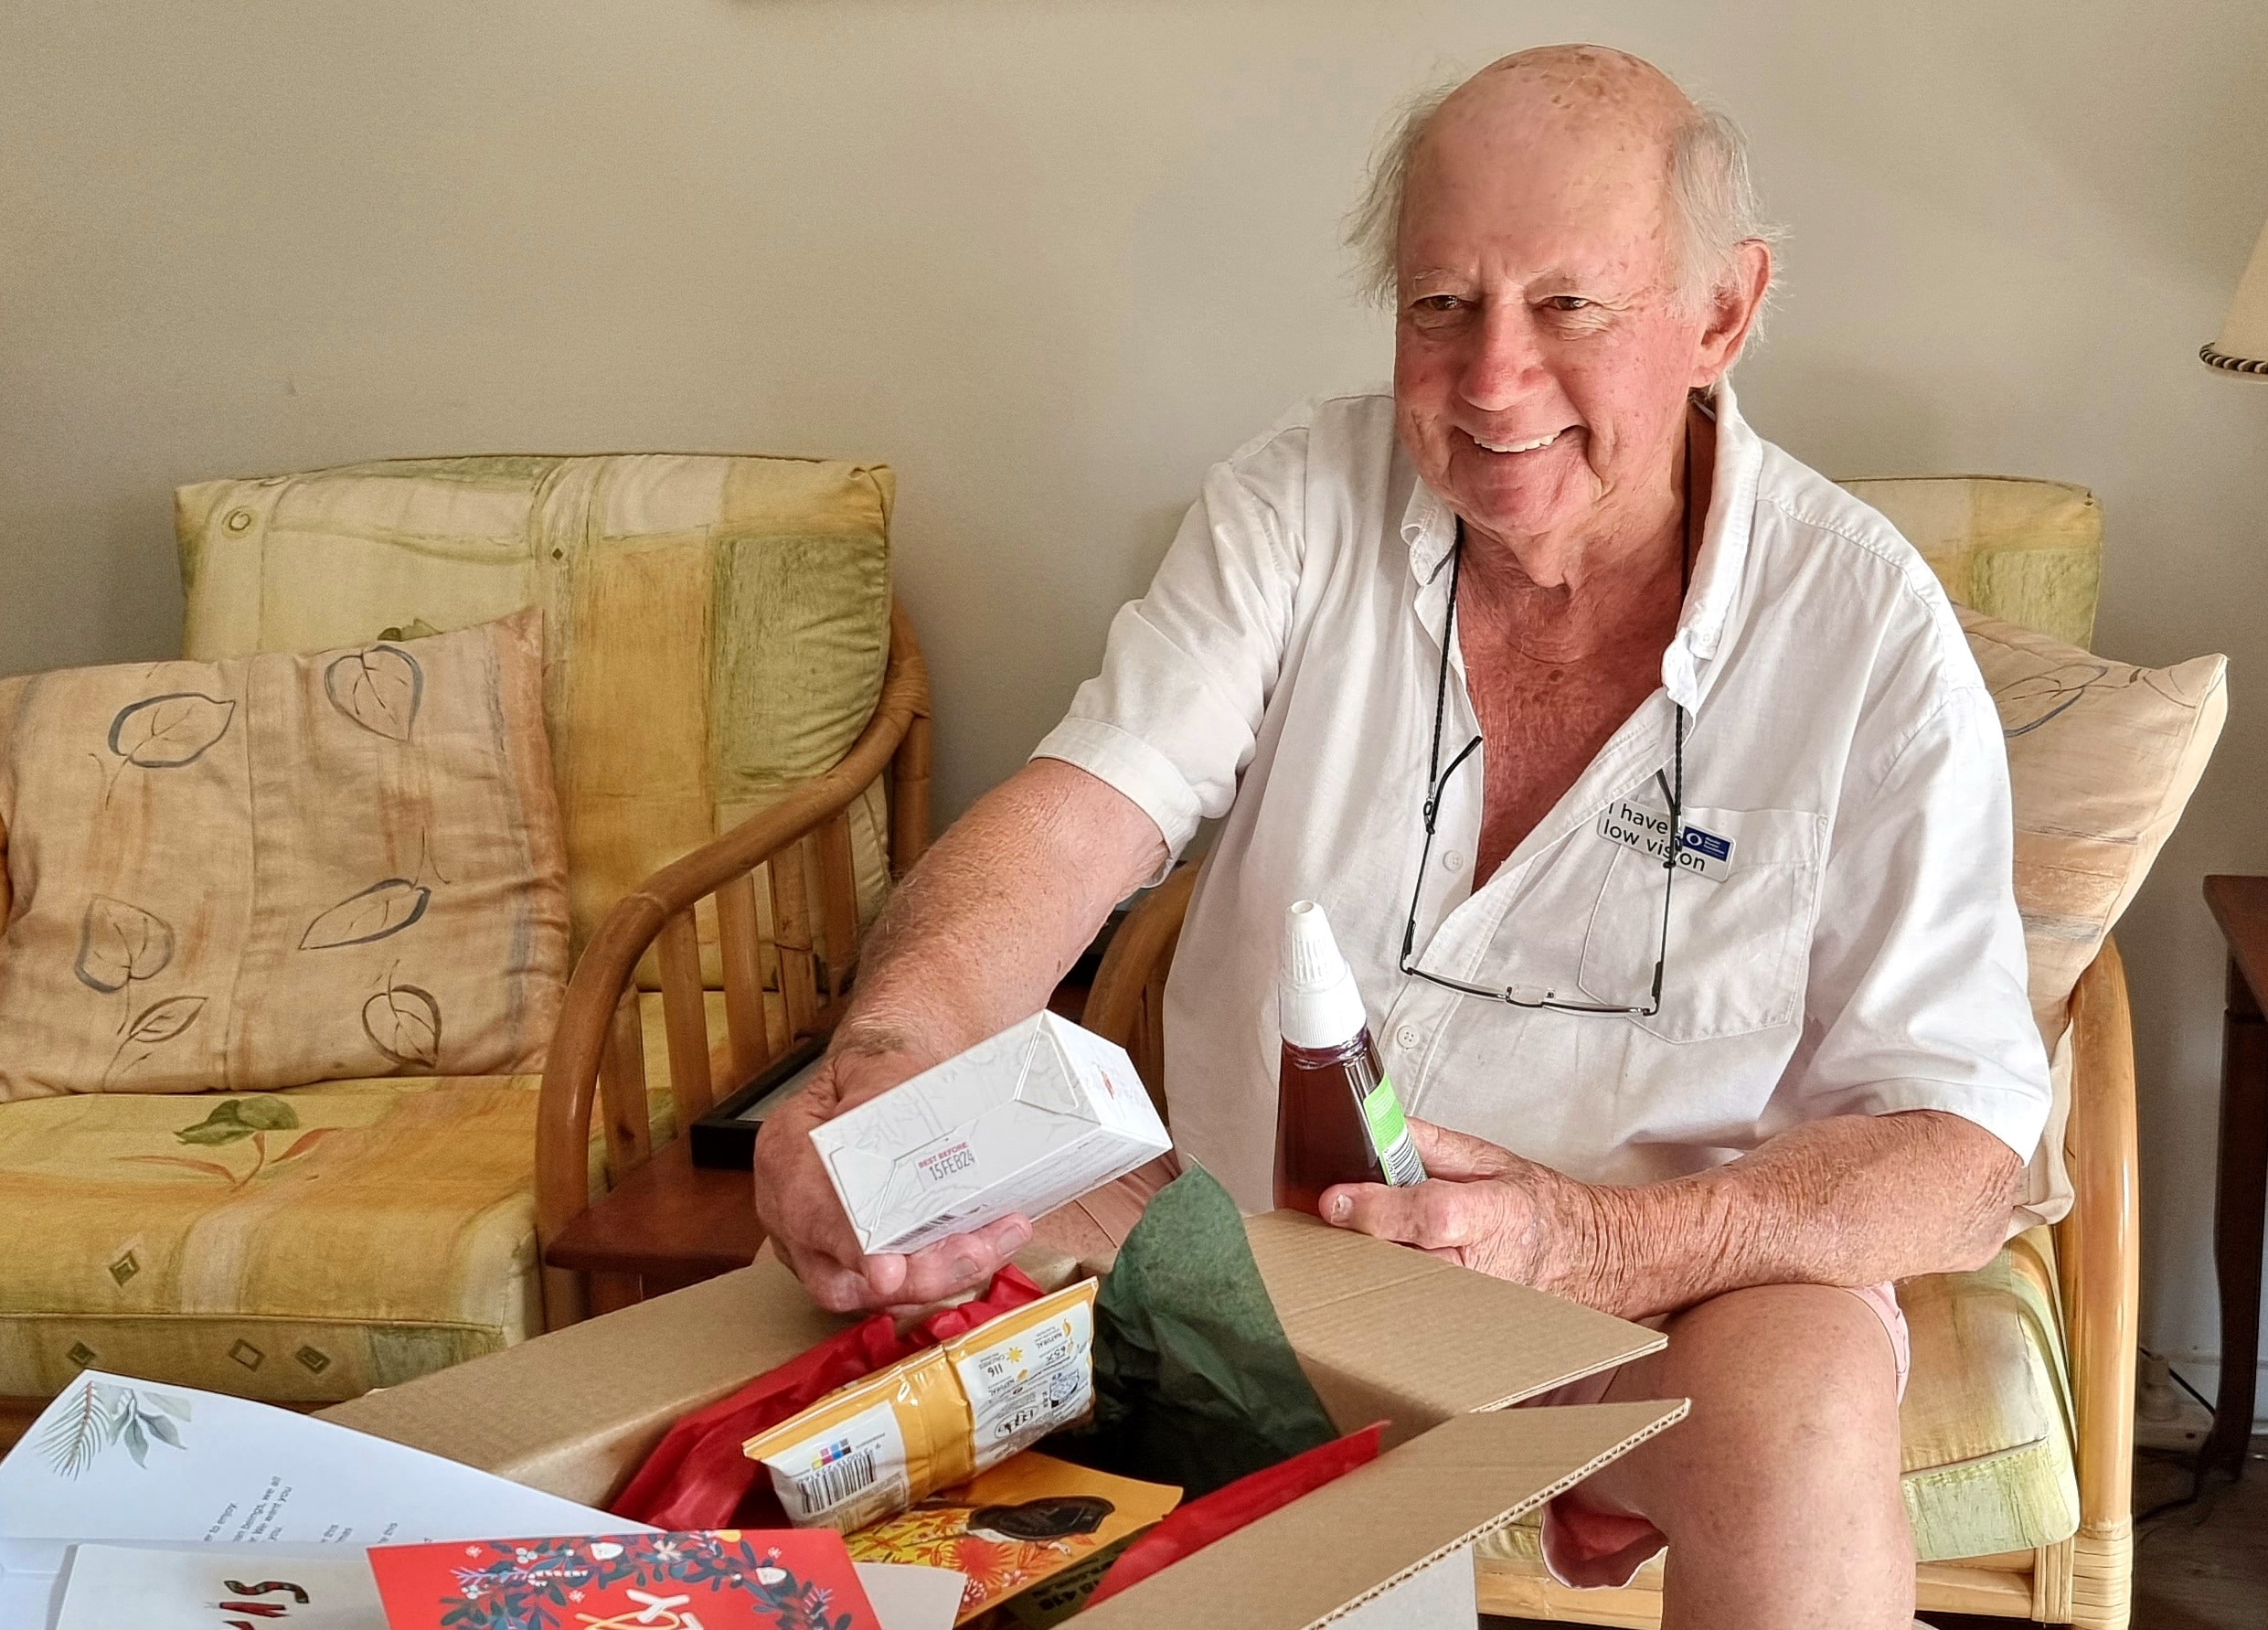 Lonely old man opening Christmas gift, hamper from charity organisation.